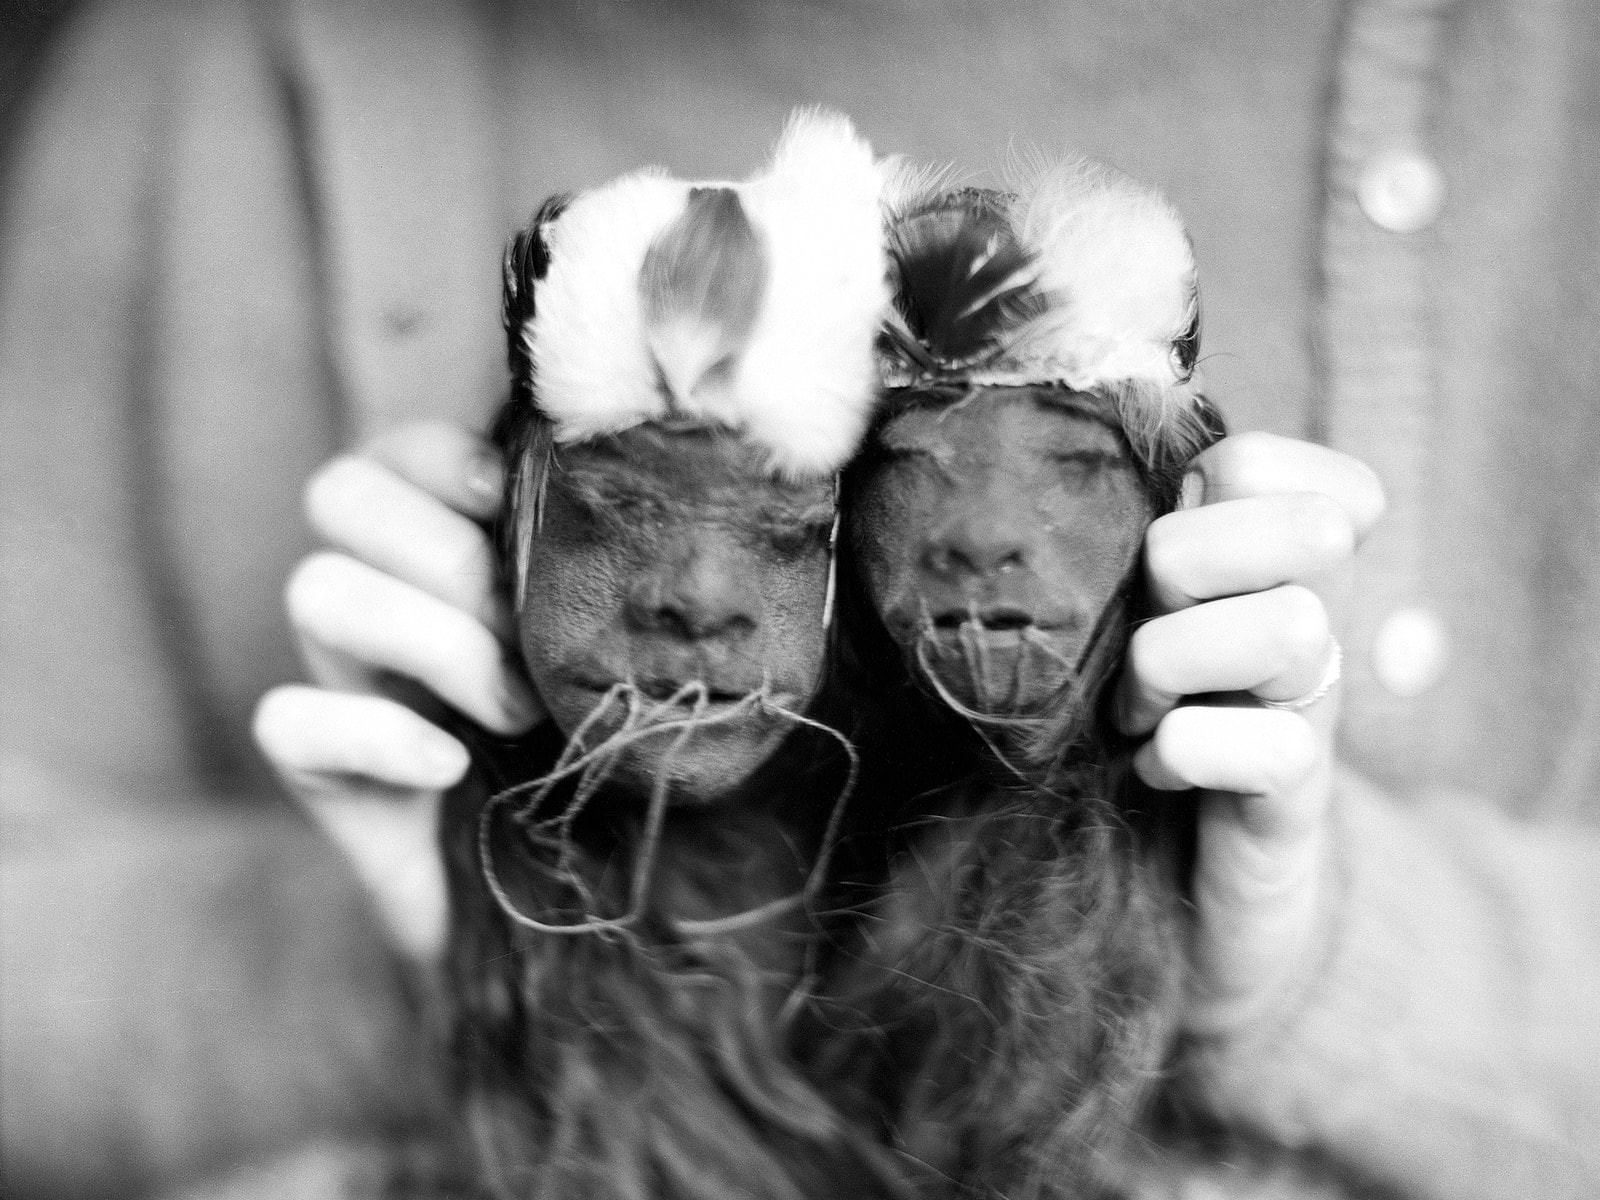 A 19th-century anthropologist showing off his pair of shrunken heads from Ecuador